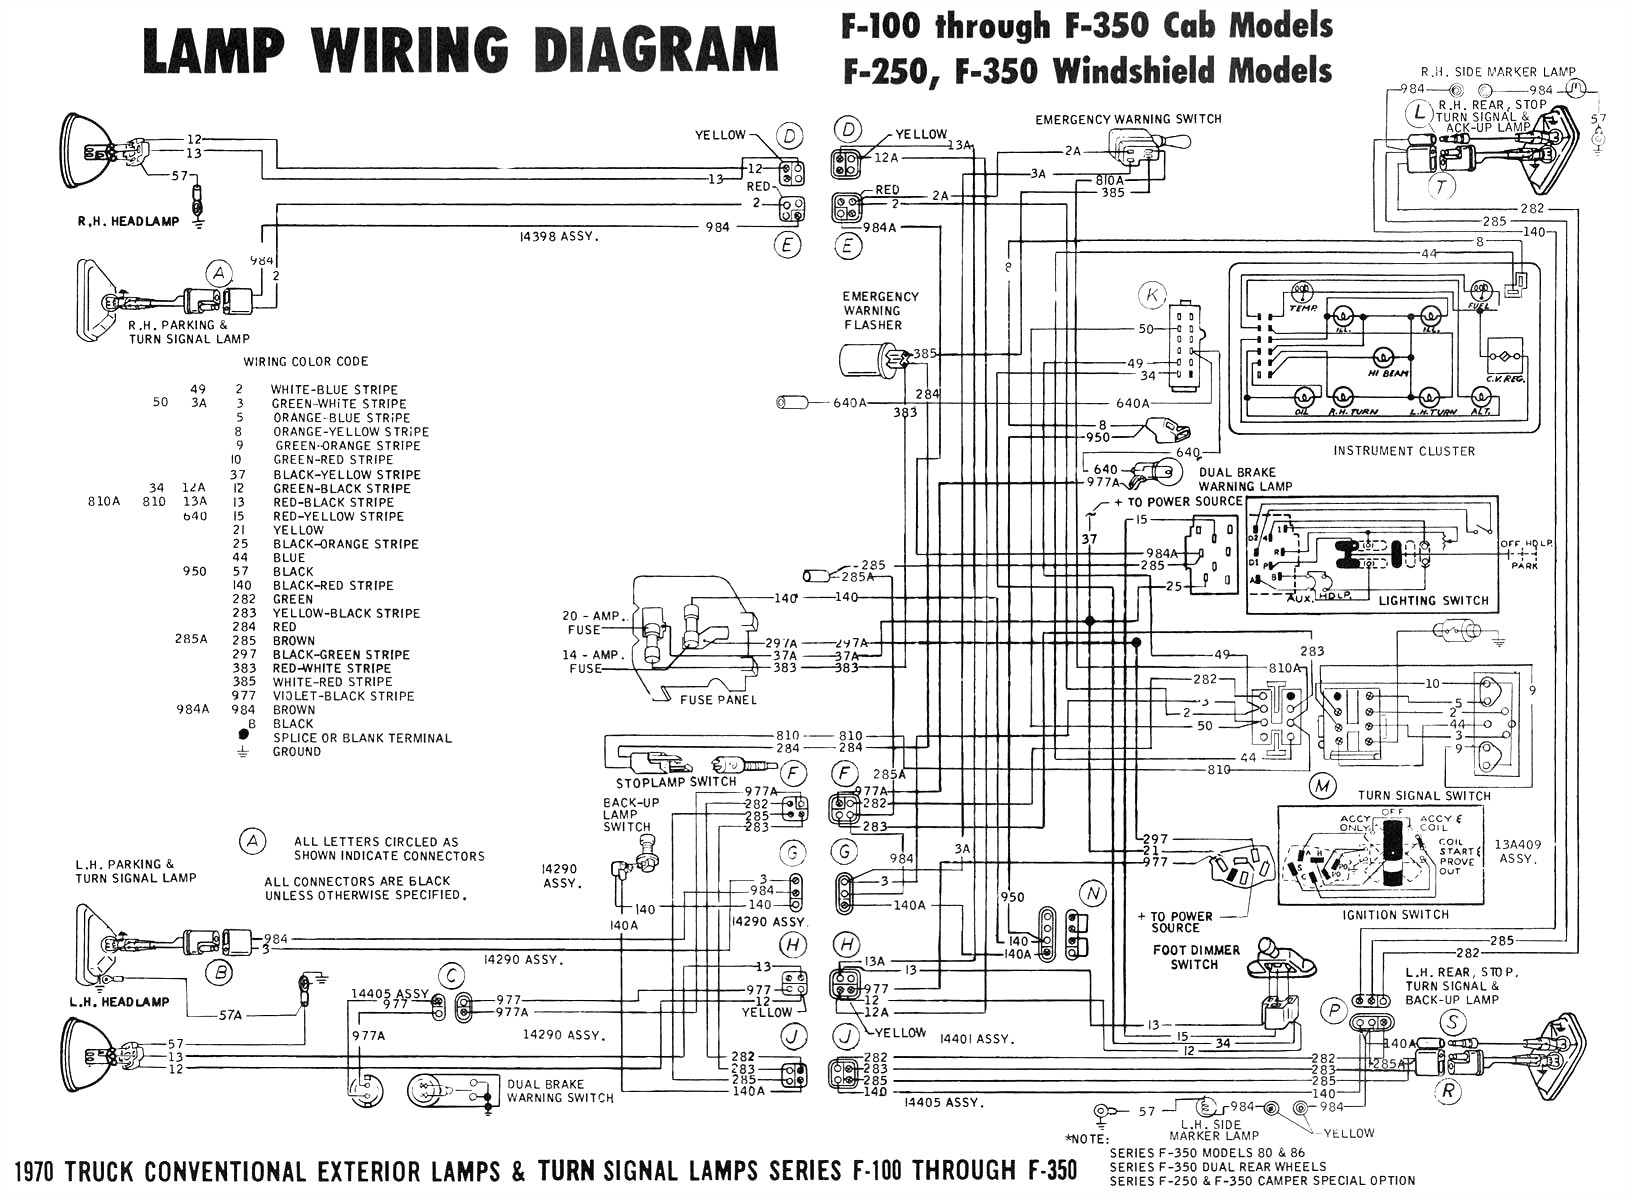 Wiring Diagram for Cruise Control Cruisecontrol Fuse Box Wiring Diagram Wiring Diagram Home